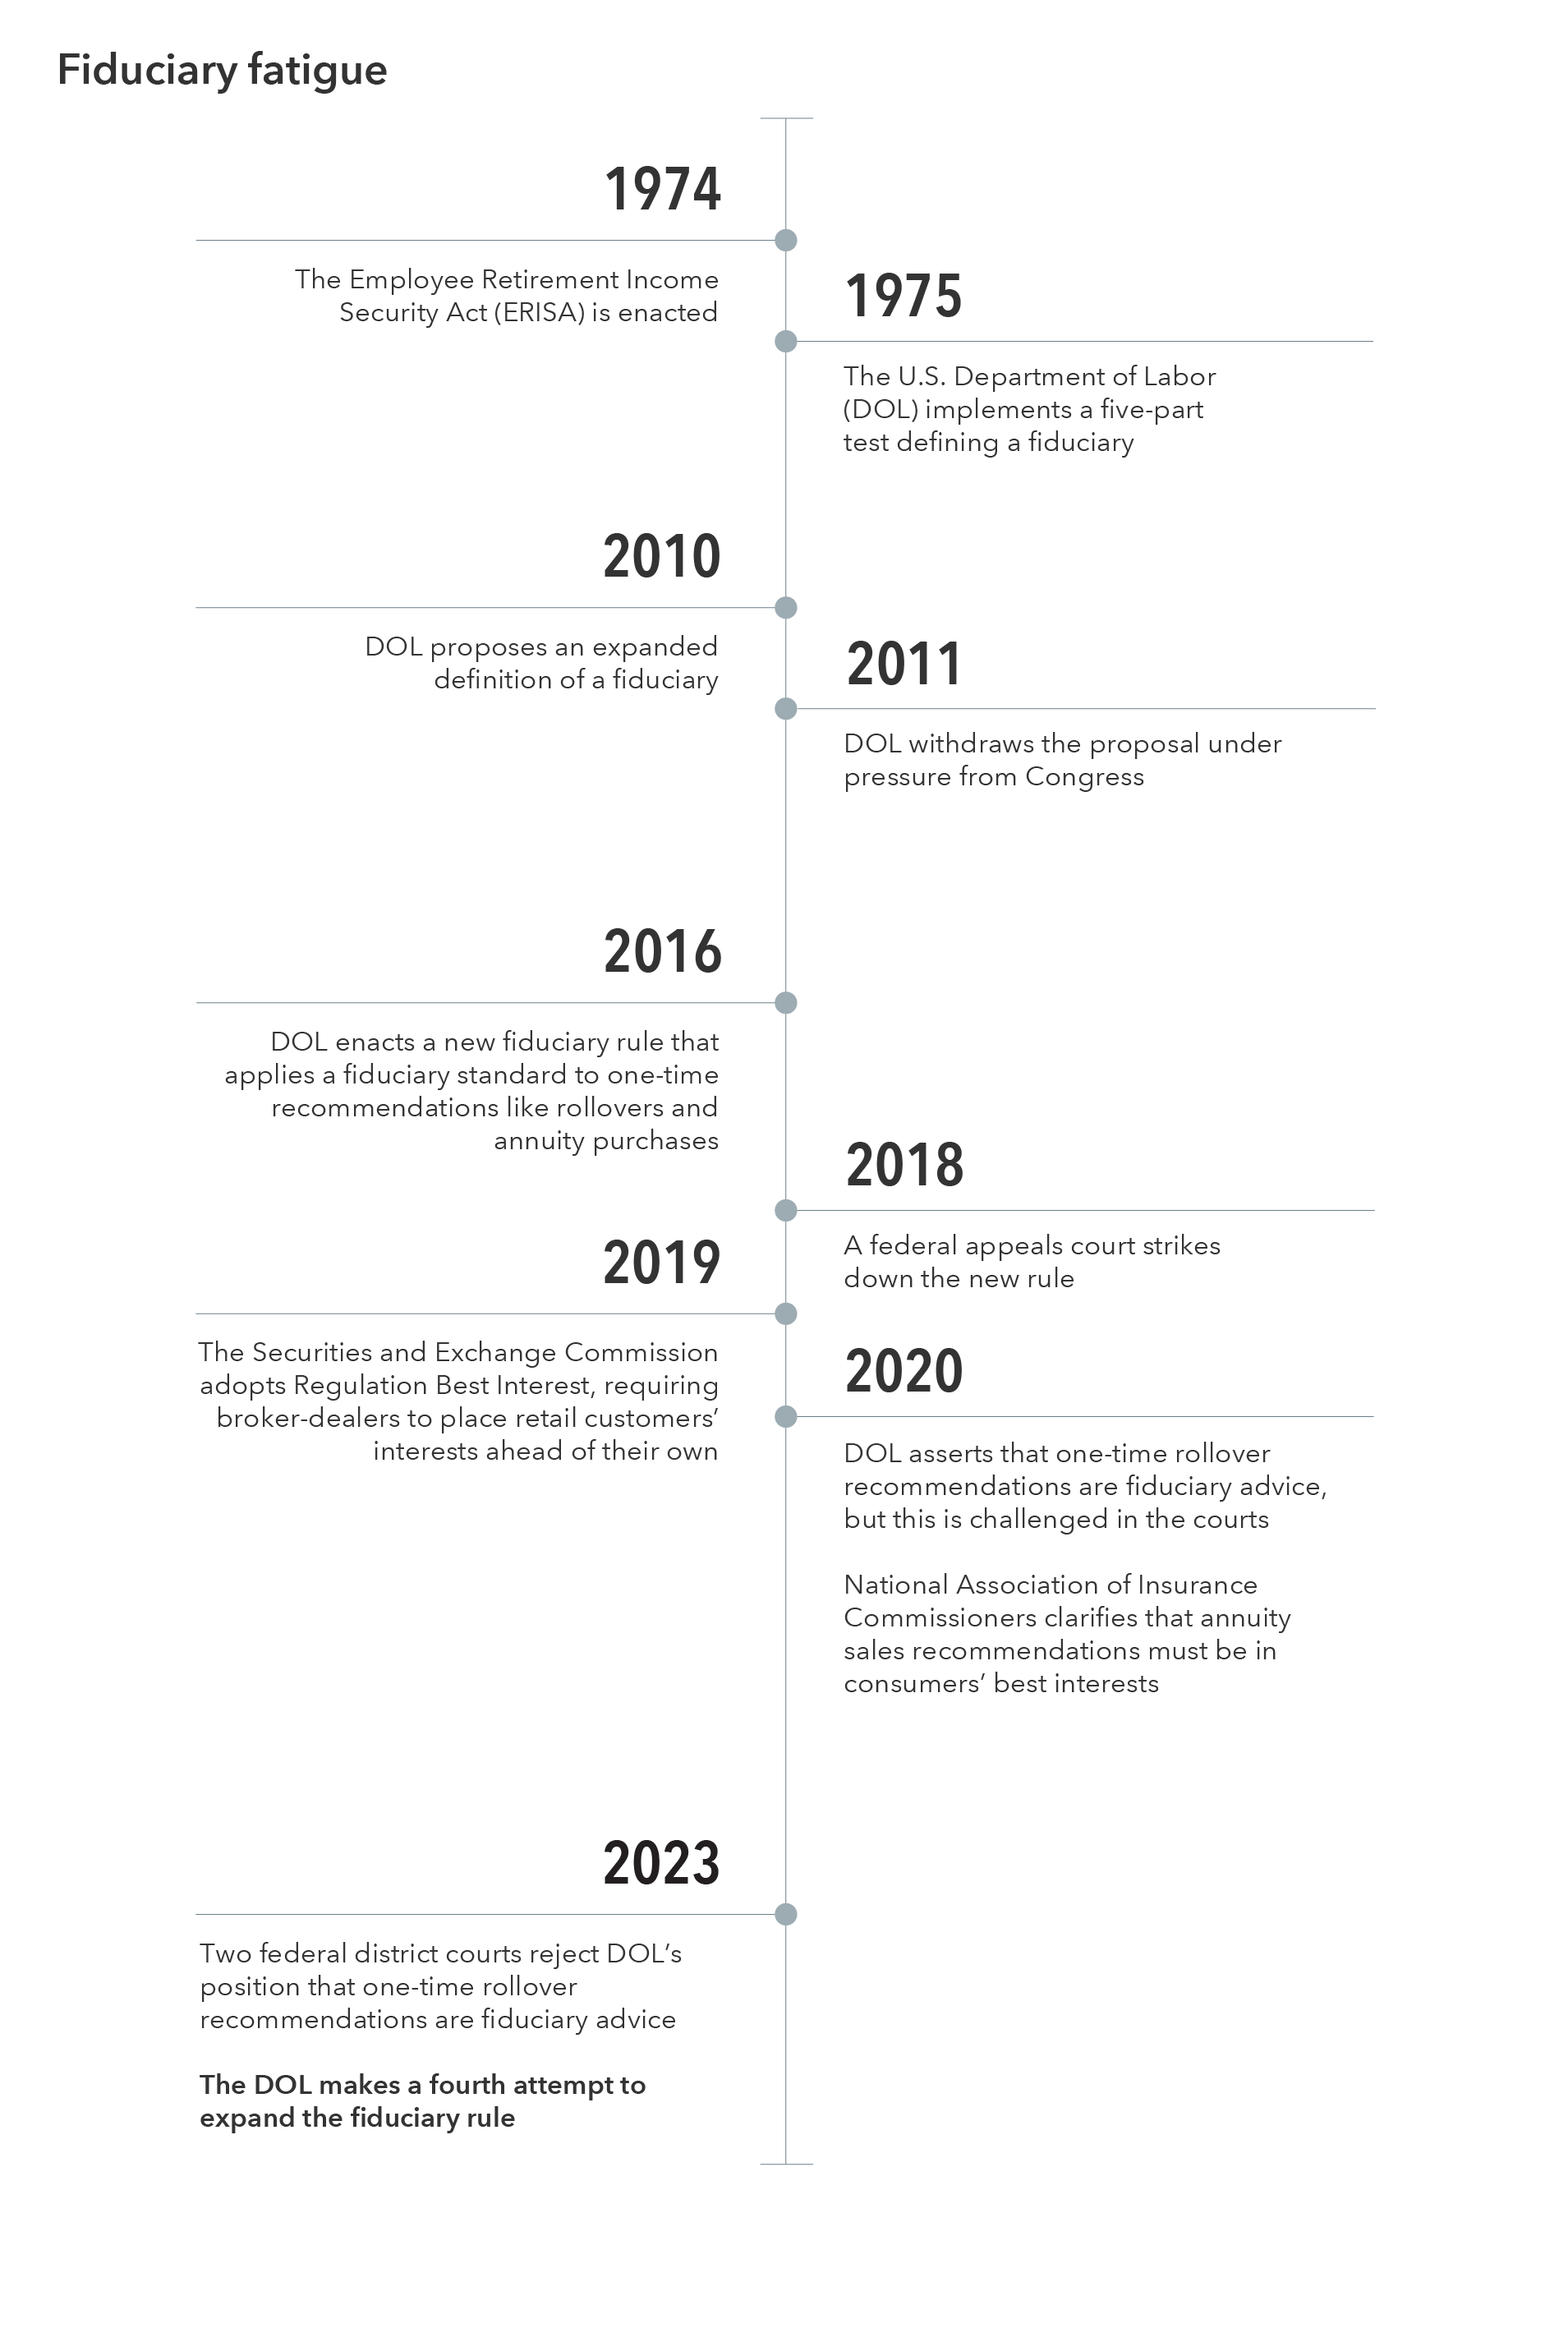 Timeline presents key events surrounding the U.S. Department of Labor’s (DOL) fiduciary rule and other regulations related to investment advice. The exhibit is titled “Fiduciary fatigue.” It displays the following events: 1974, the Employee Retirement Income Security Act (ERISA) is enacted; 1975, the U.S. Department of Labor implements a five-part test defining a fiduciary; 2010, DOL proposes an expanded definition of a fiduciary; 2011, DOL withdraws the proposal under pressure from Congress; 2016, DOL enacts a new fiduciary rule that applies a fiduciary standard to one-time recommendations like rollovers and annuity purchases; 2018, a federal appeals court strikes down the new rule; 2019, the Securities and Exchange Commission adopts Regulation Best Interest, requiring broker-dealers to place retail customers’ interests ahead of their own; 2020, DOL asserts that one-time rollover recommendations are fiduciary advice, but this is challenged in the courts; 2020, National Association of Insurance Commissioners clarifies that annuity sales recommendations must be in consumers’ best interests; 2023, two federal district courts reject DOL’s position that one-time rollover recommendations are fiduciary advice; 2023, the DOL makes a fourth attempt to expand the fiduciary rule.